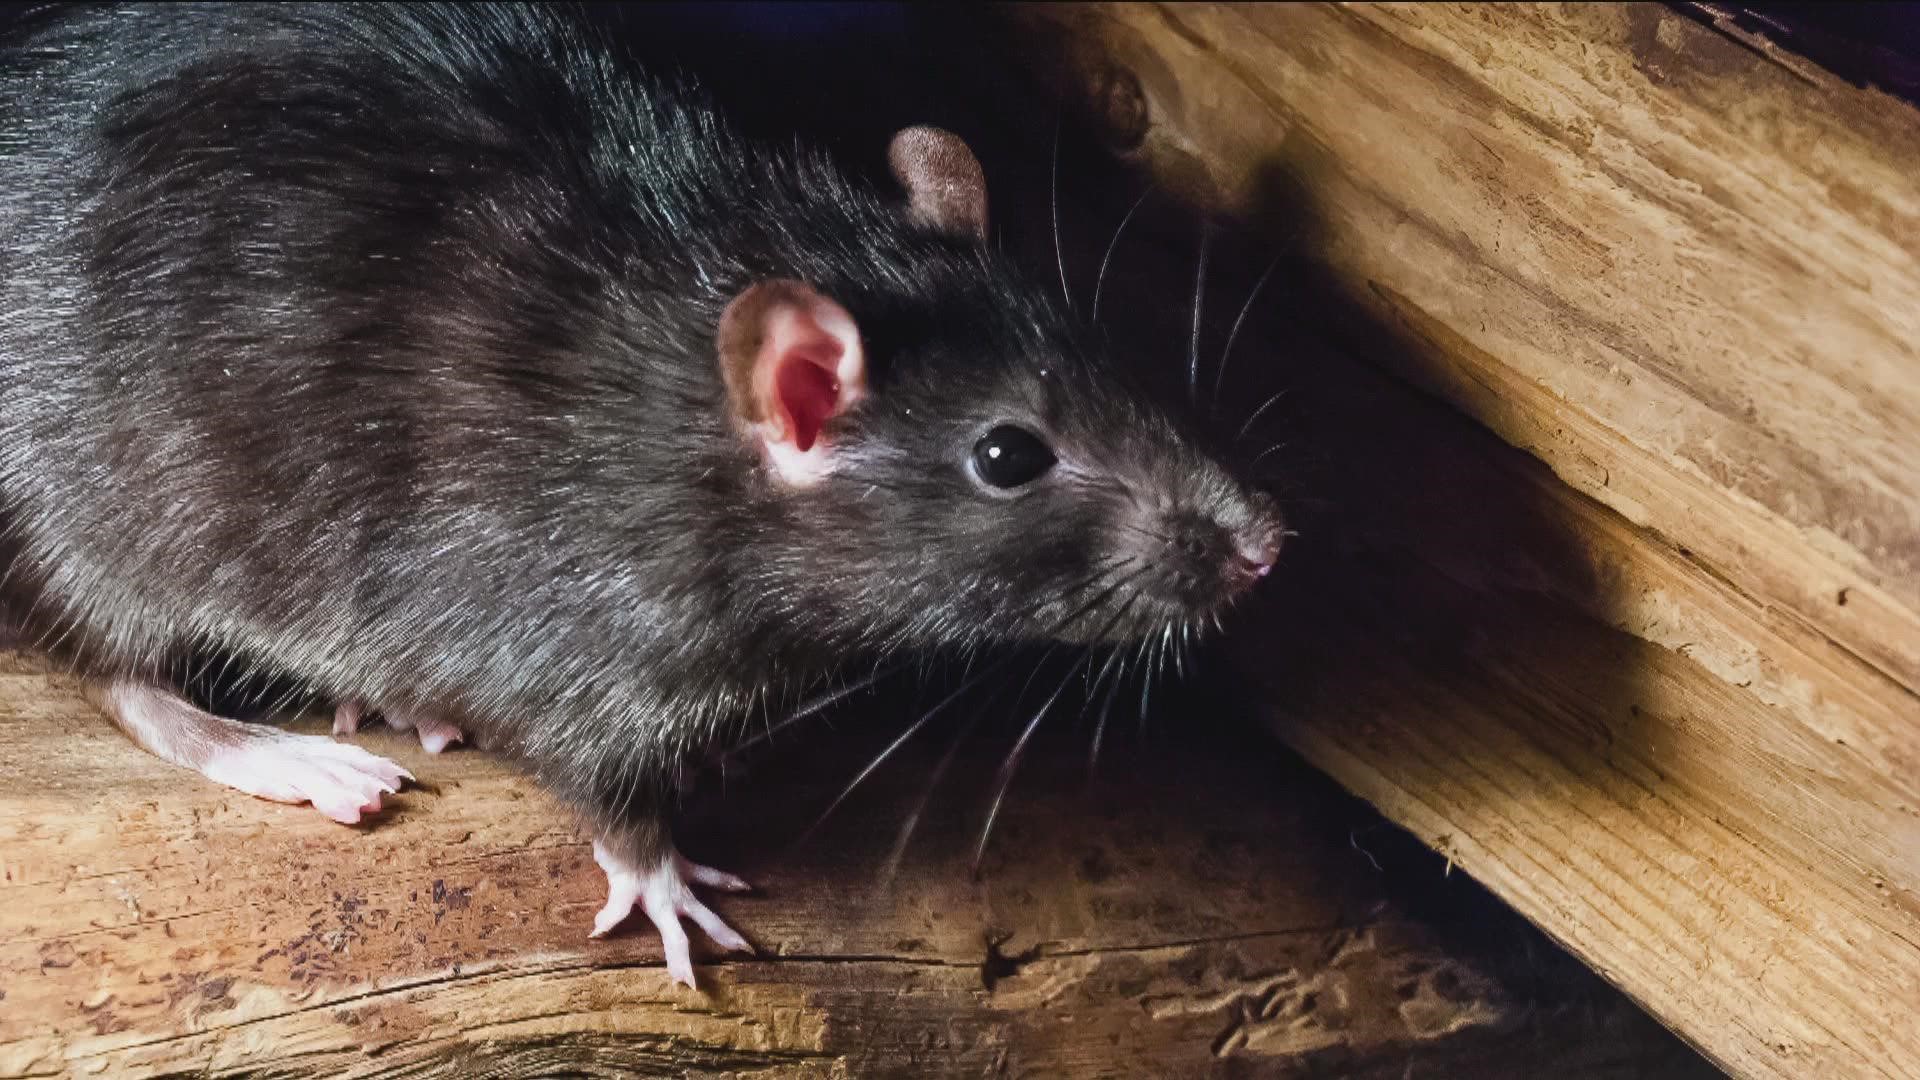 More construction and our recent drought conditions have led to rodent experts responding to more calls about rats in homes.